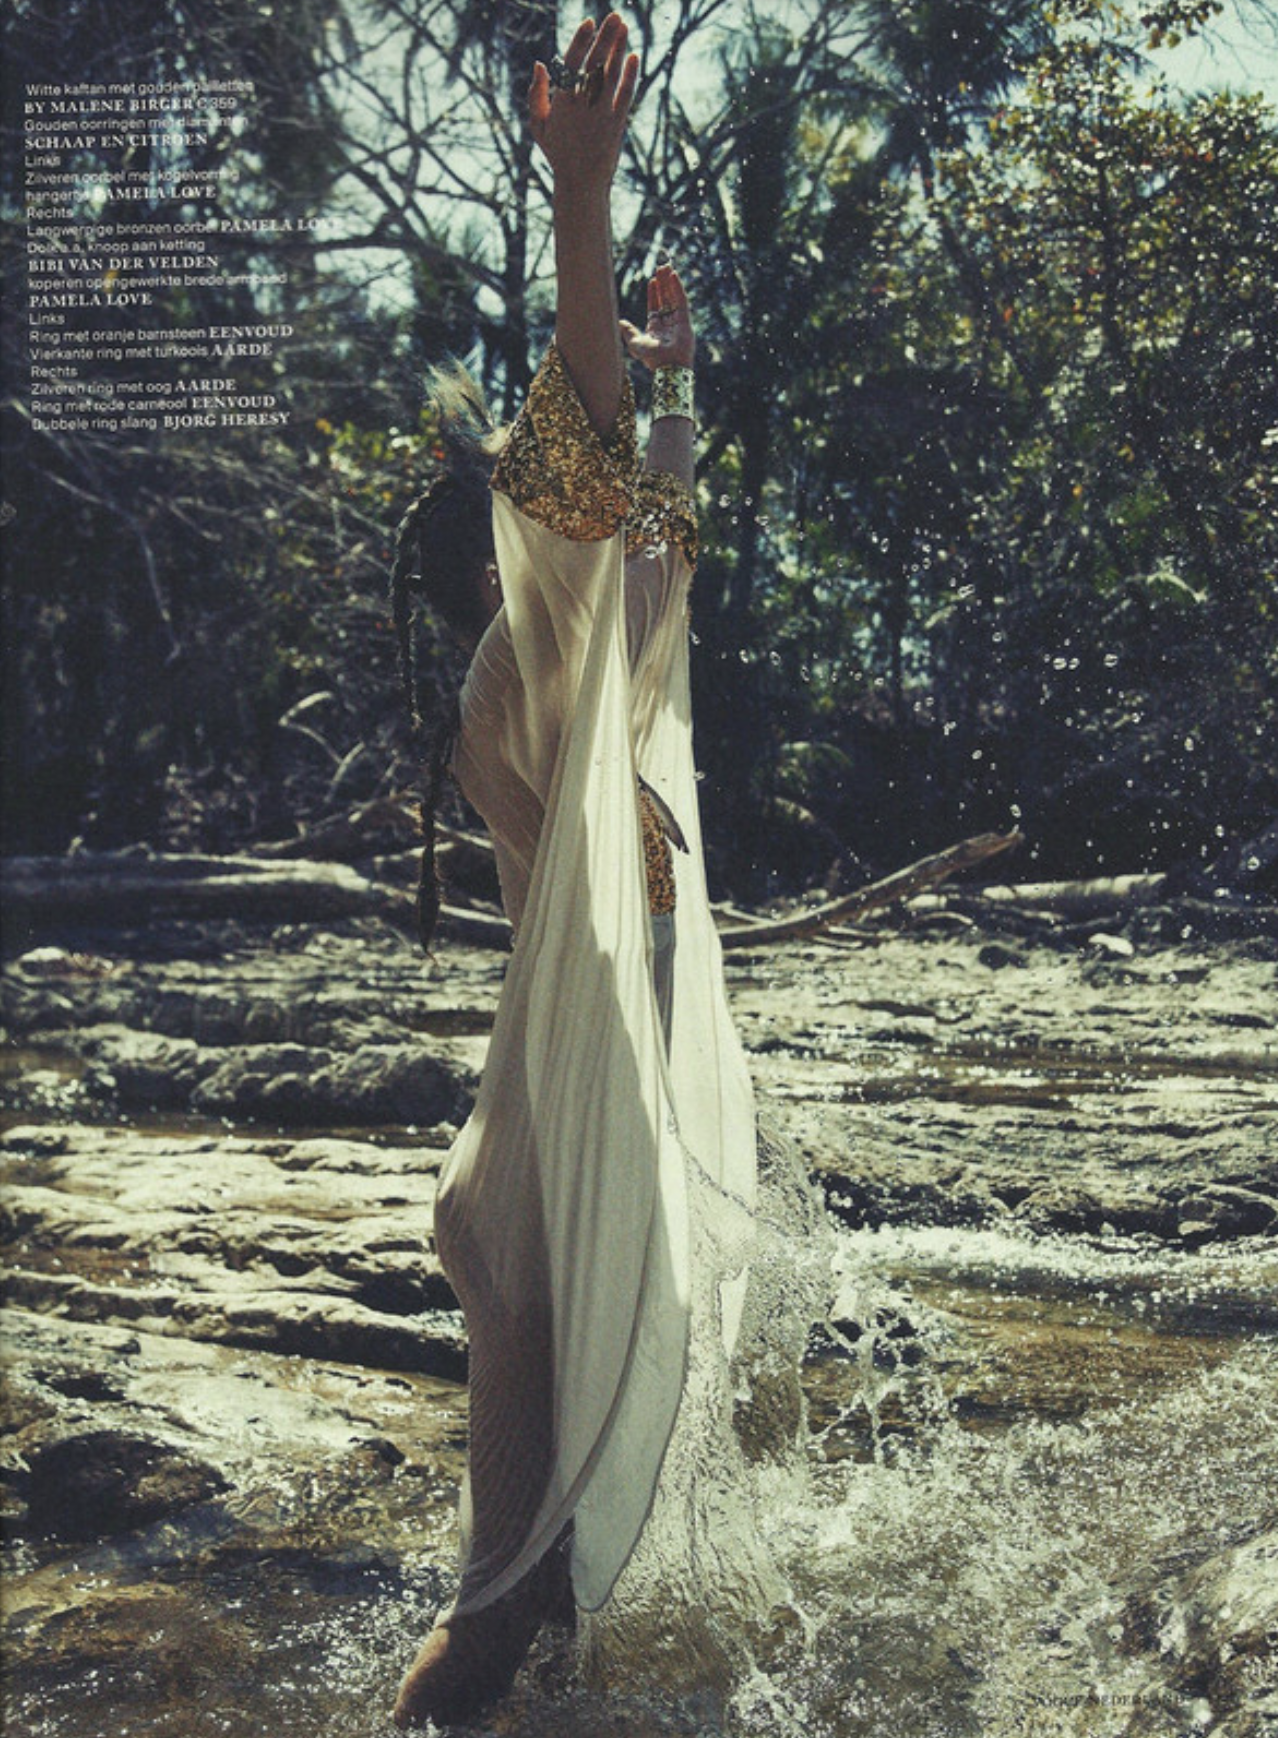 Rianne-Ten-Haken-by-Petrovsky-Ramone-for-Vogue-Netherlands-May-2012-10.png